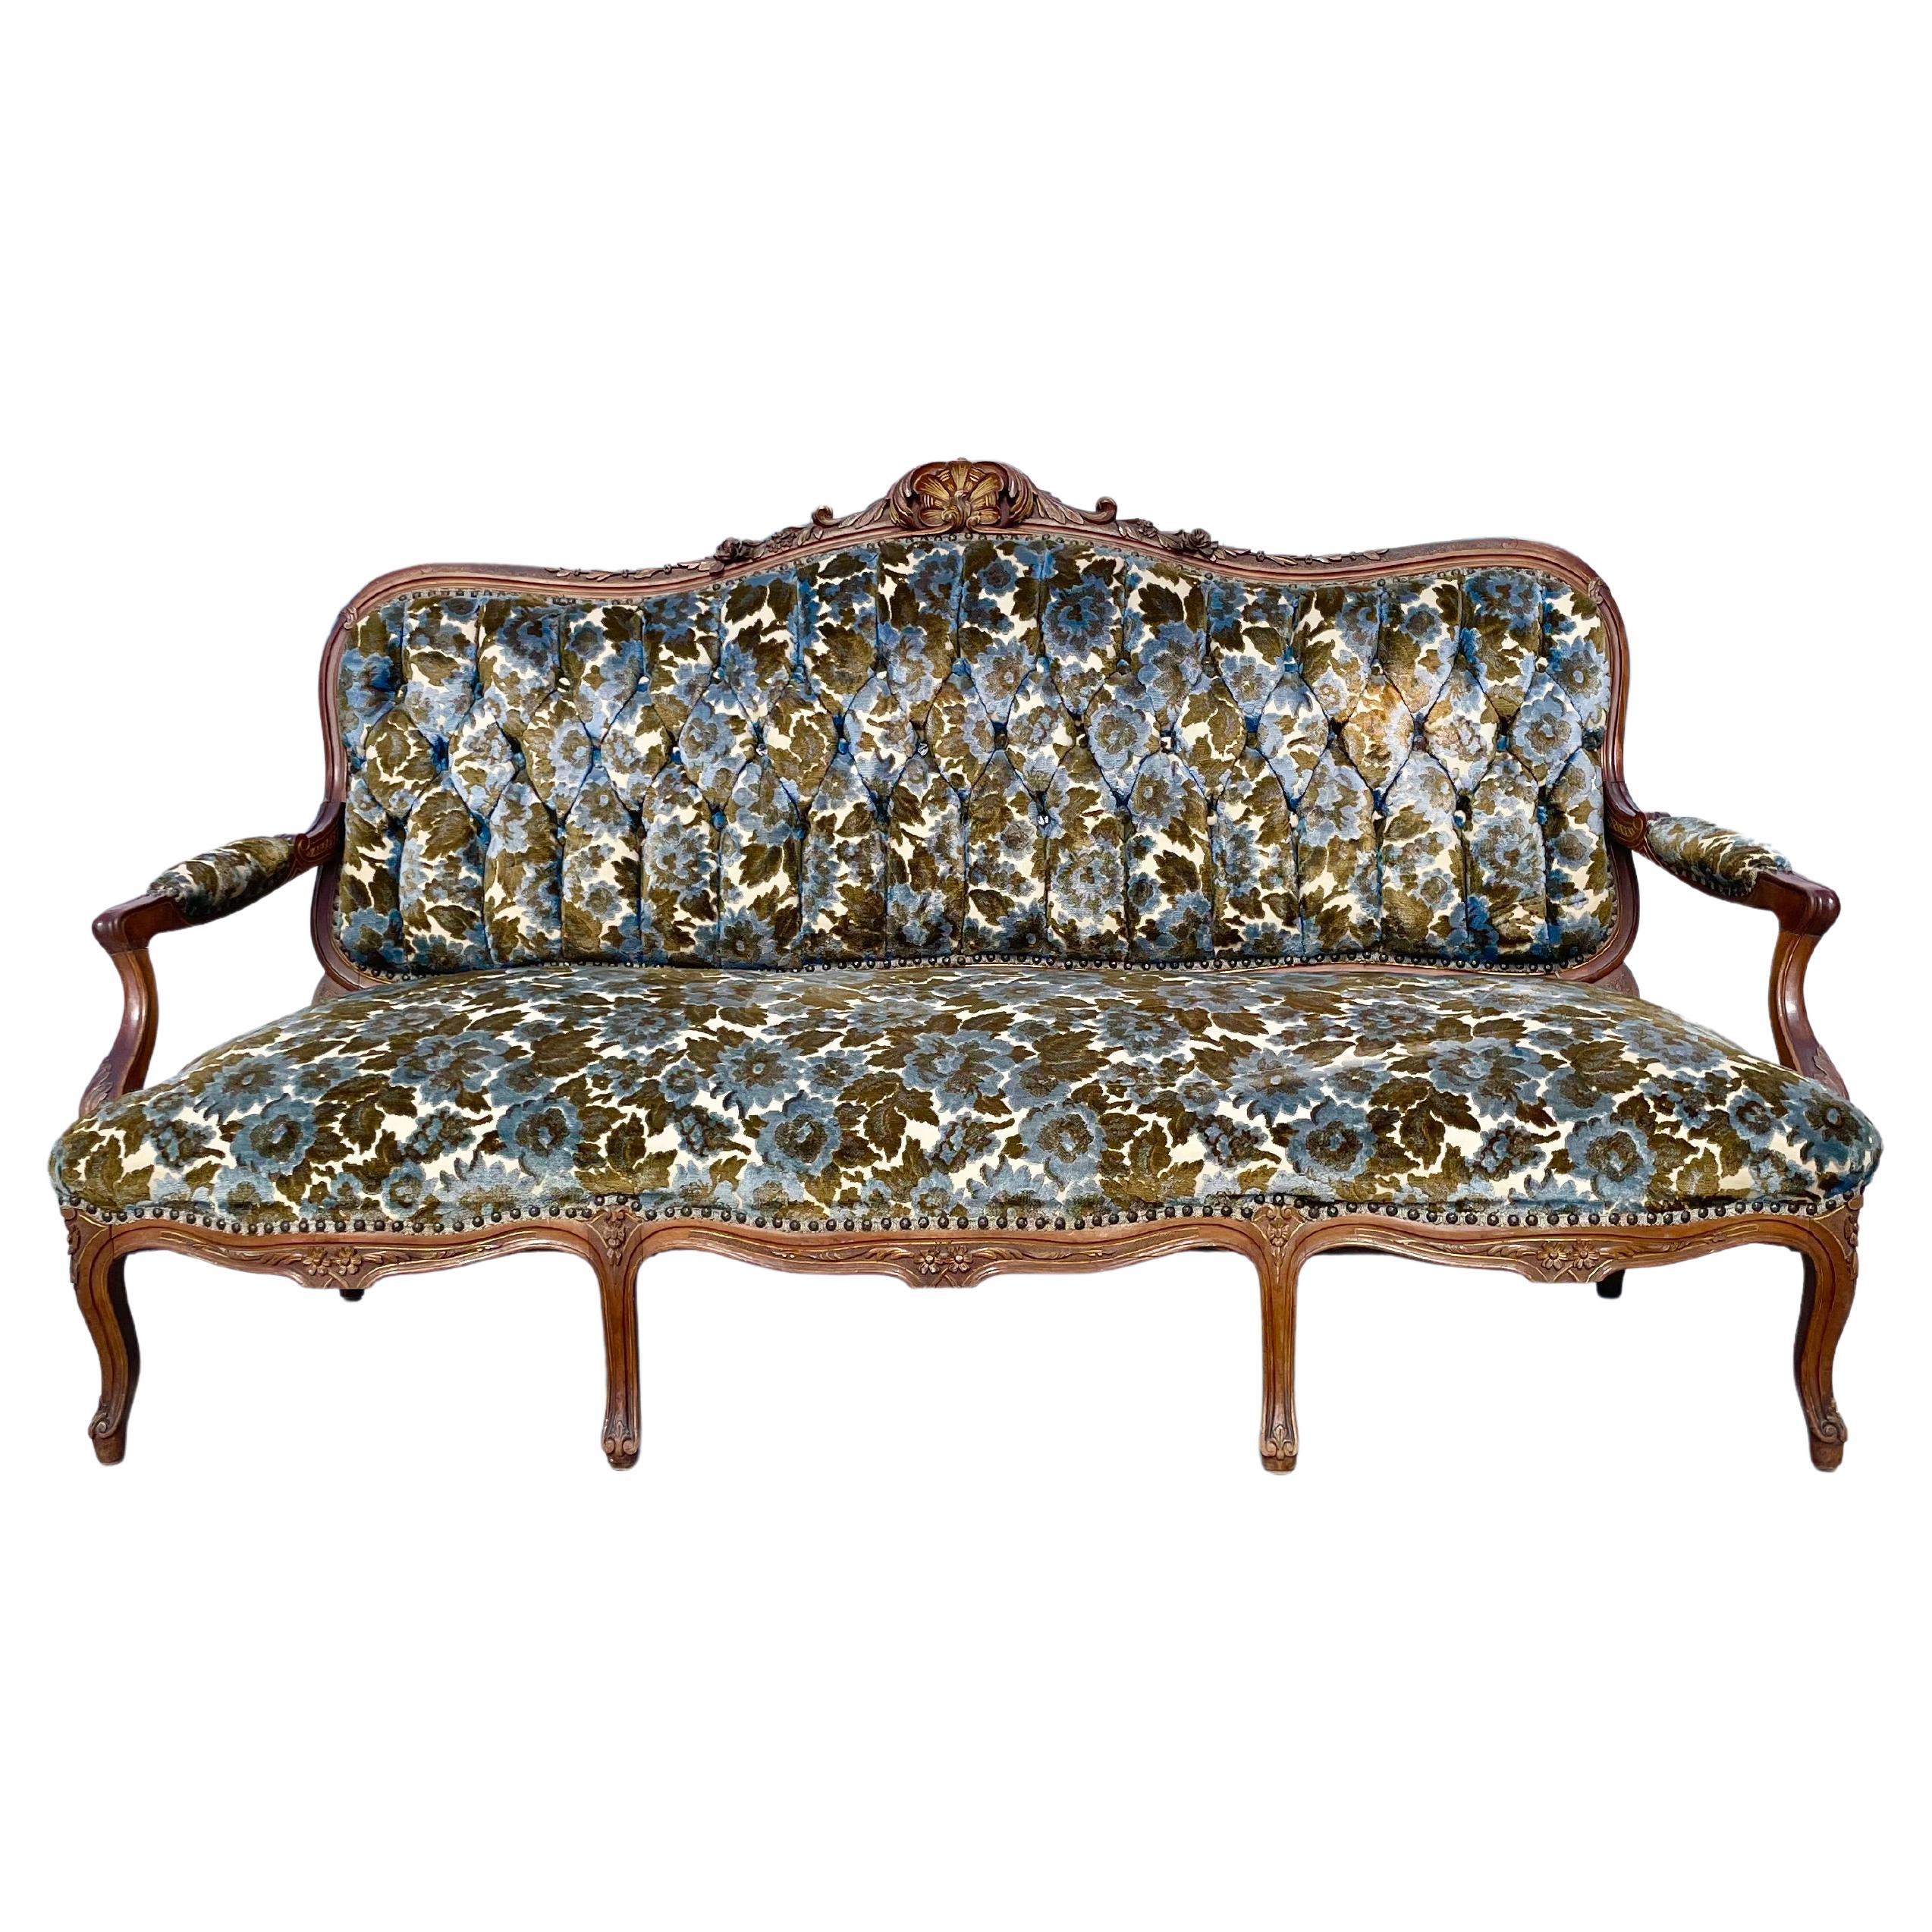 Early 20th Century Vintage French Sofa Styled After Louis XV